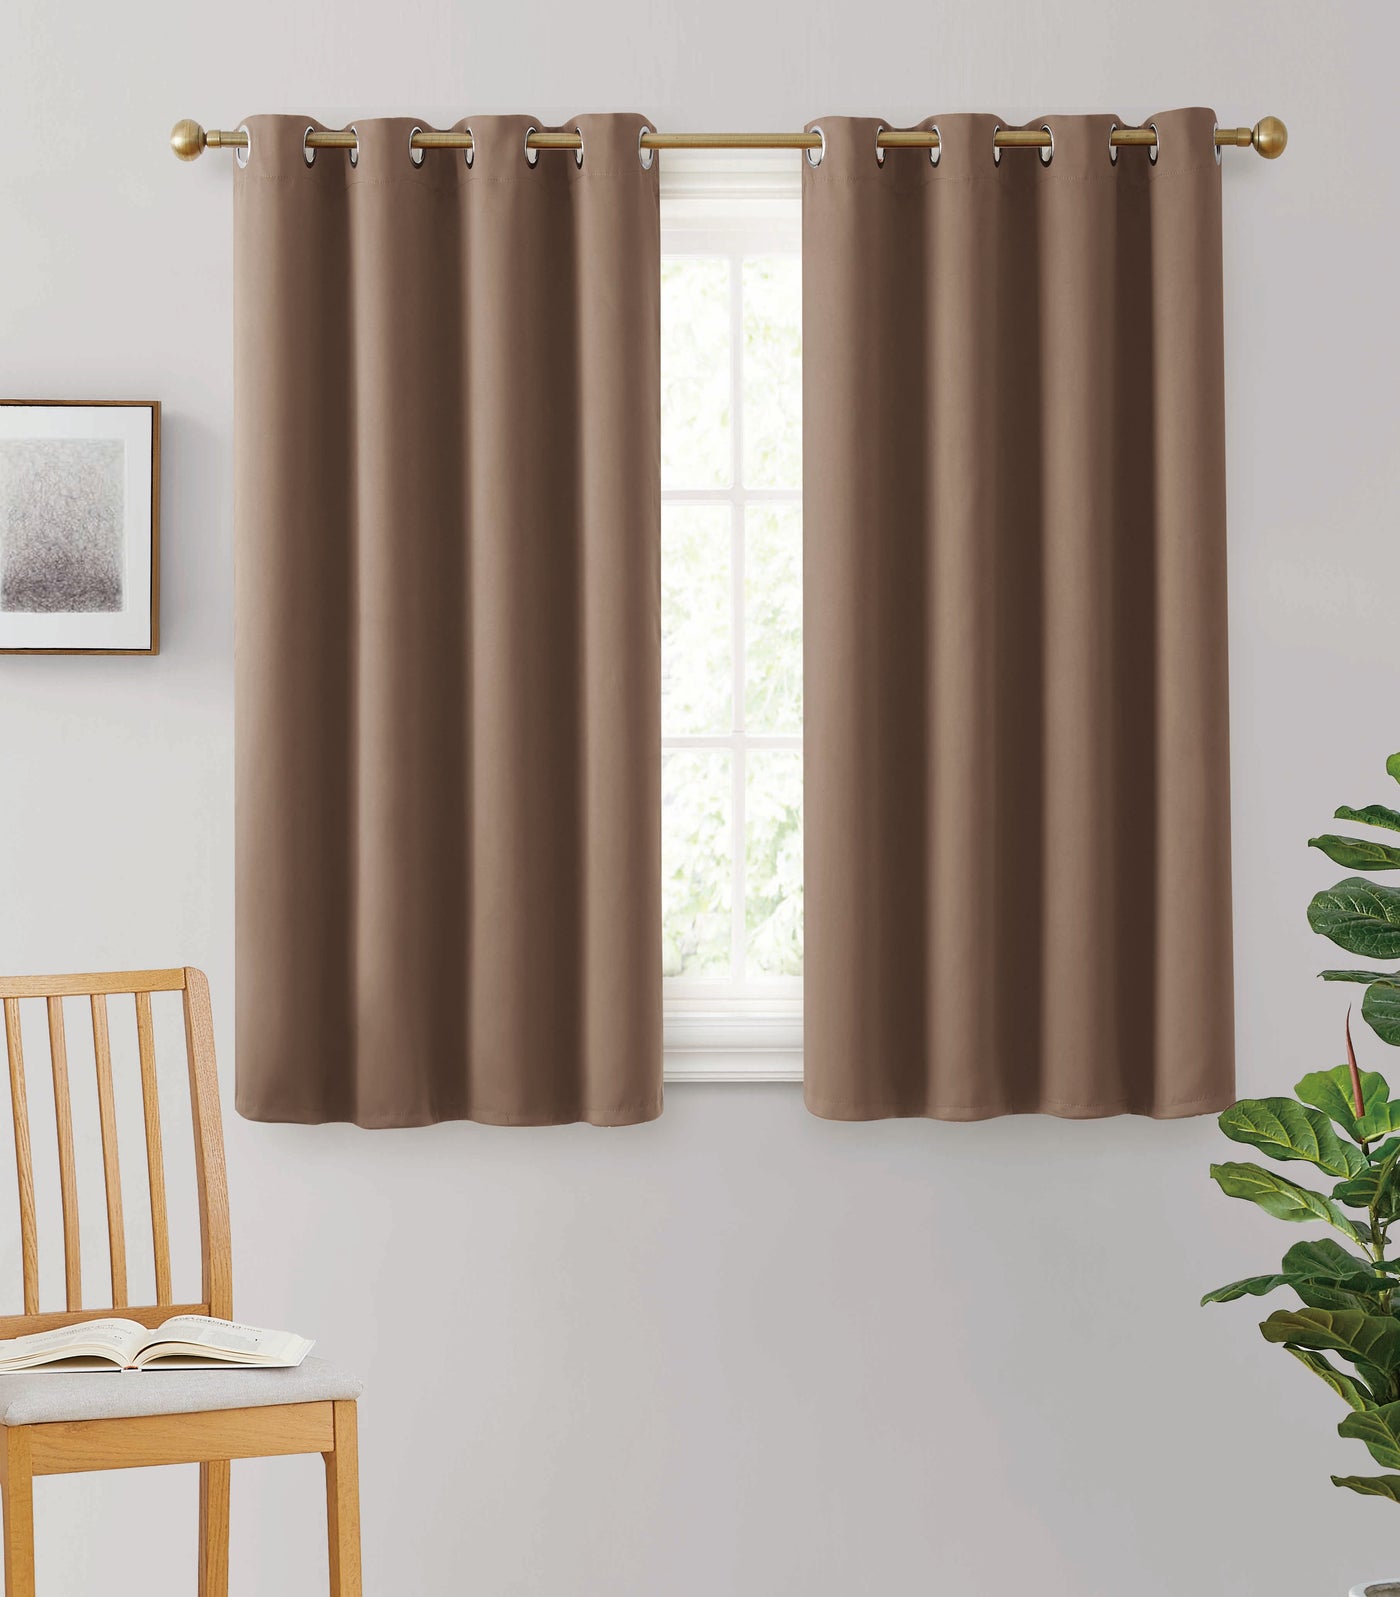 2pc Solid Grommet Thermal Insulated Window Curtain Panels Room Darkening Blackout 54"